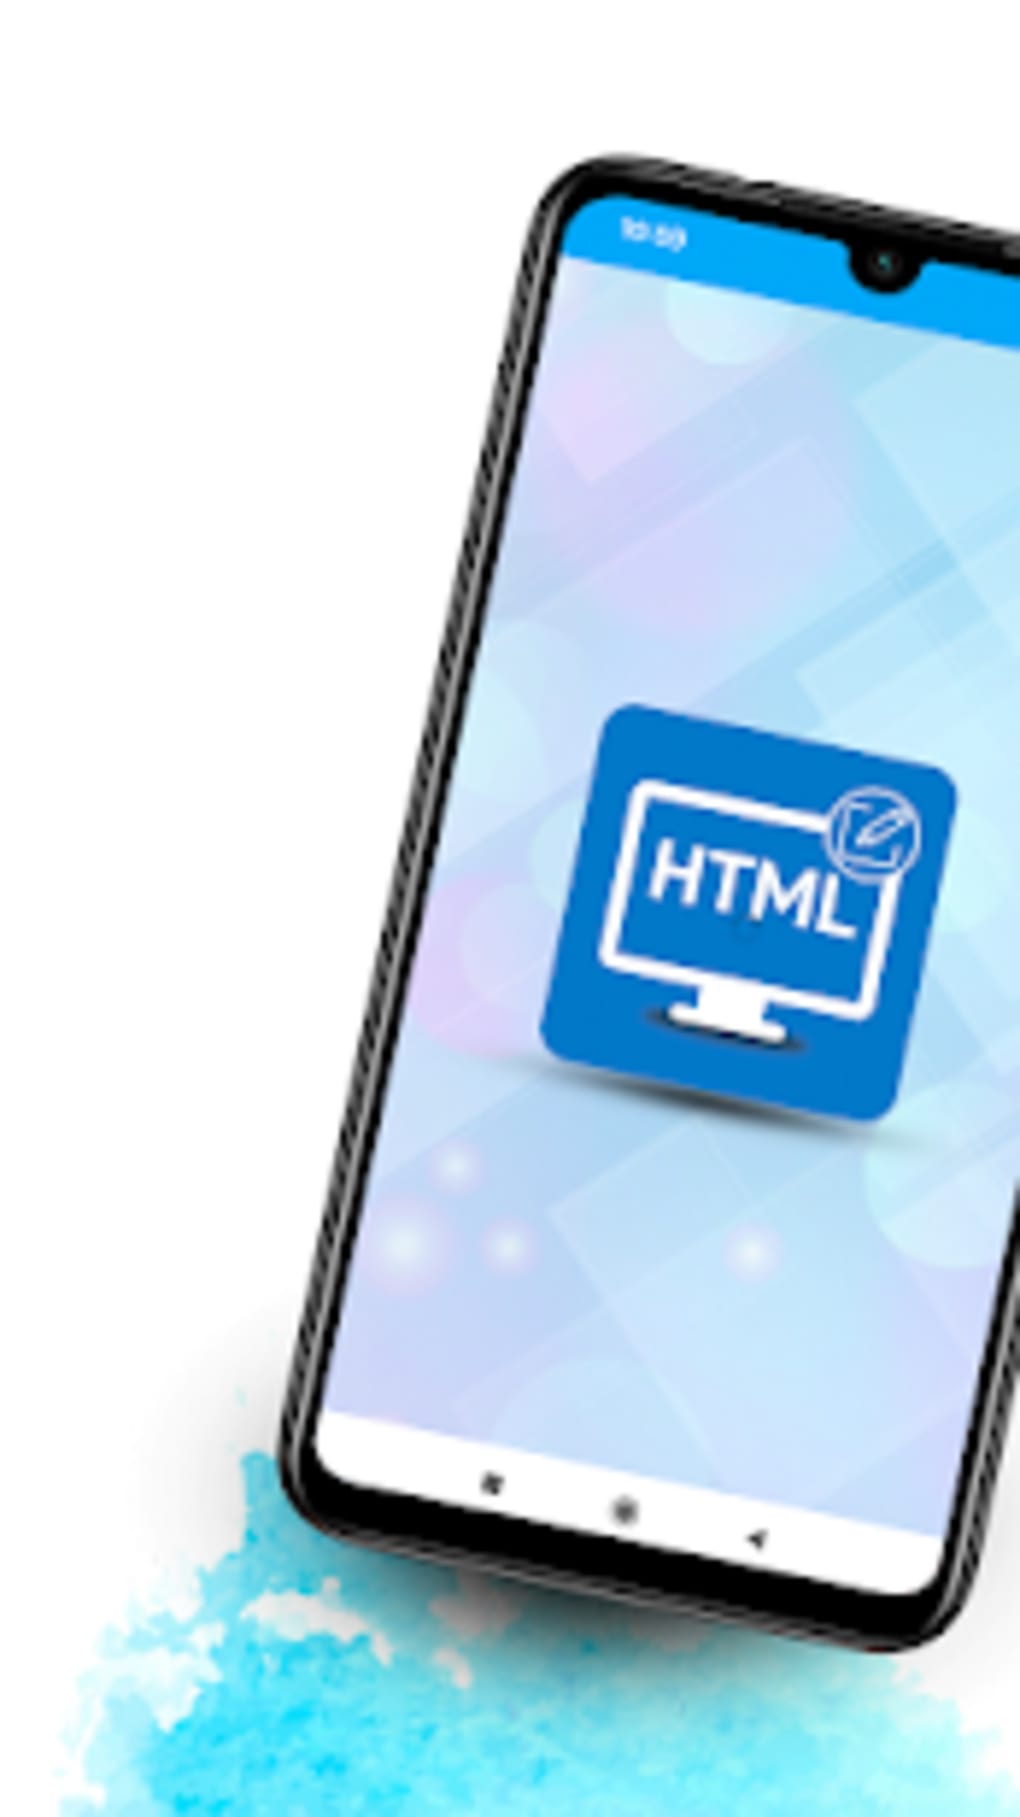 html notepad download for android